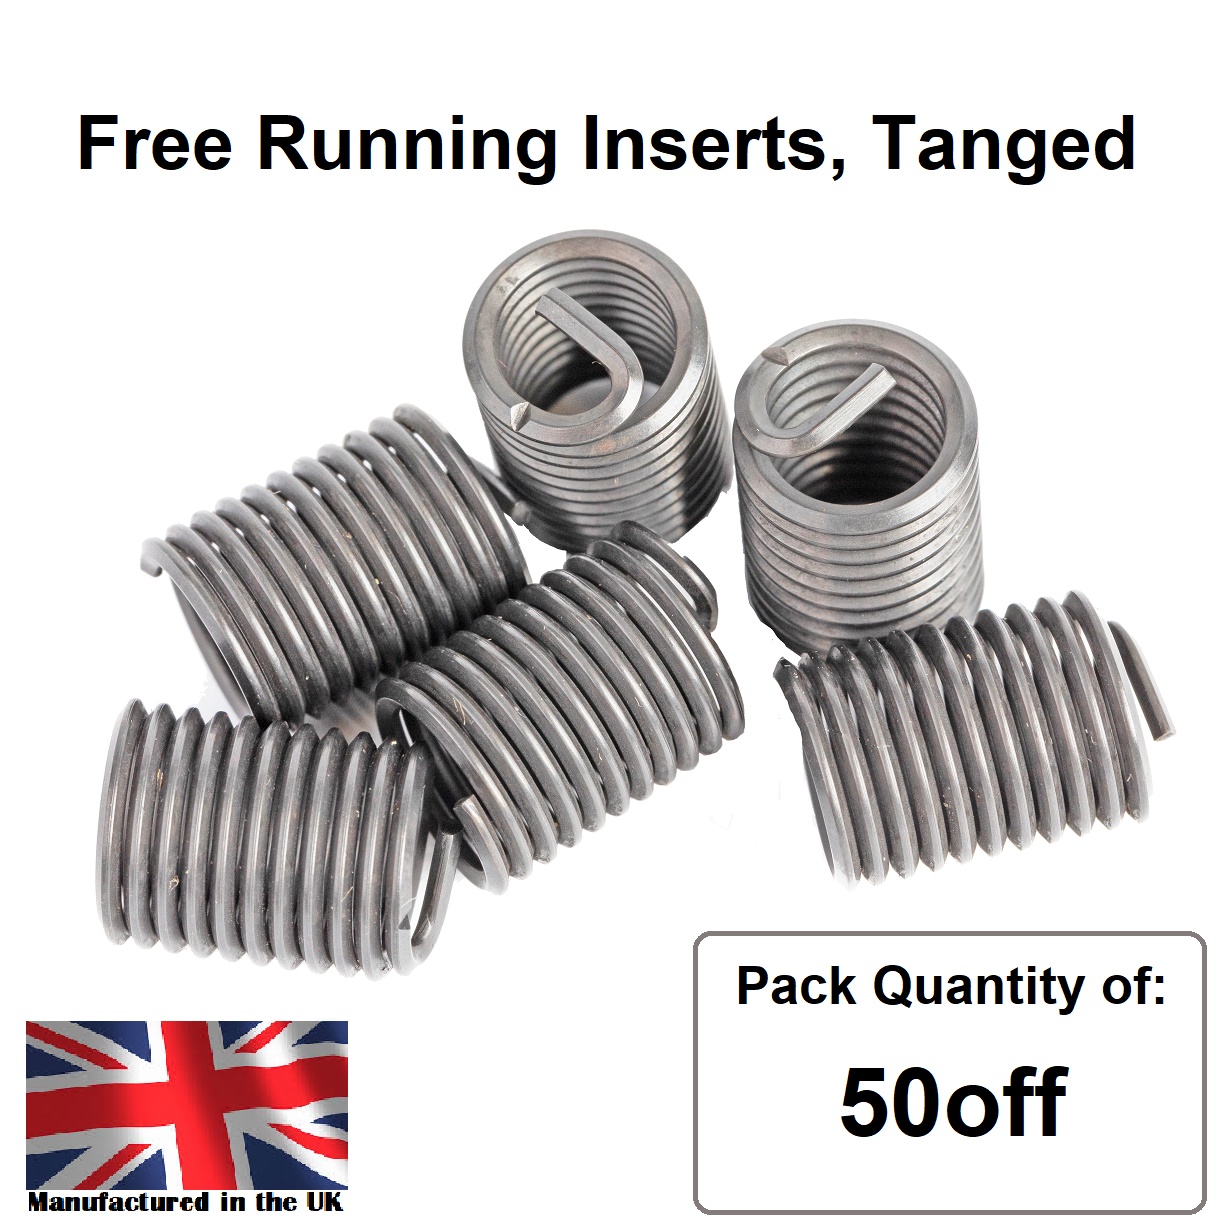 5/16 x 24 x 2D UNF, Free Running, Tanged, Wire Thread Repair Insert, 304/A2 Stainless (Pack 50)